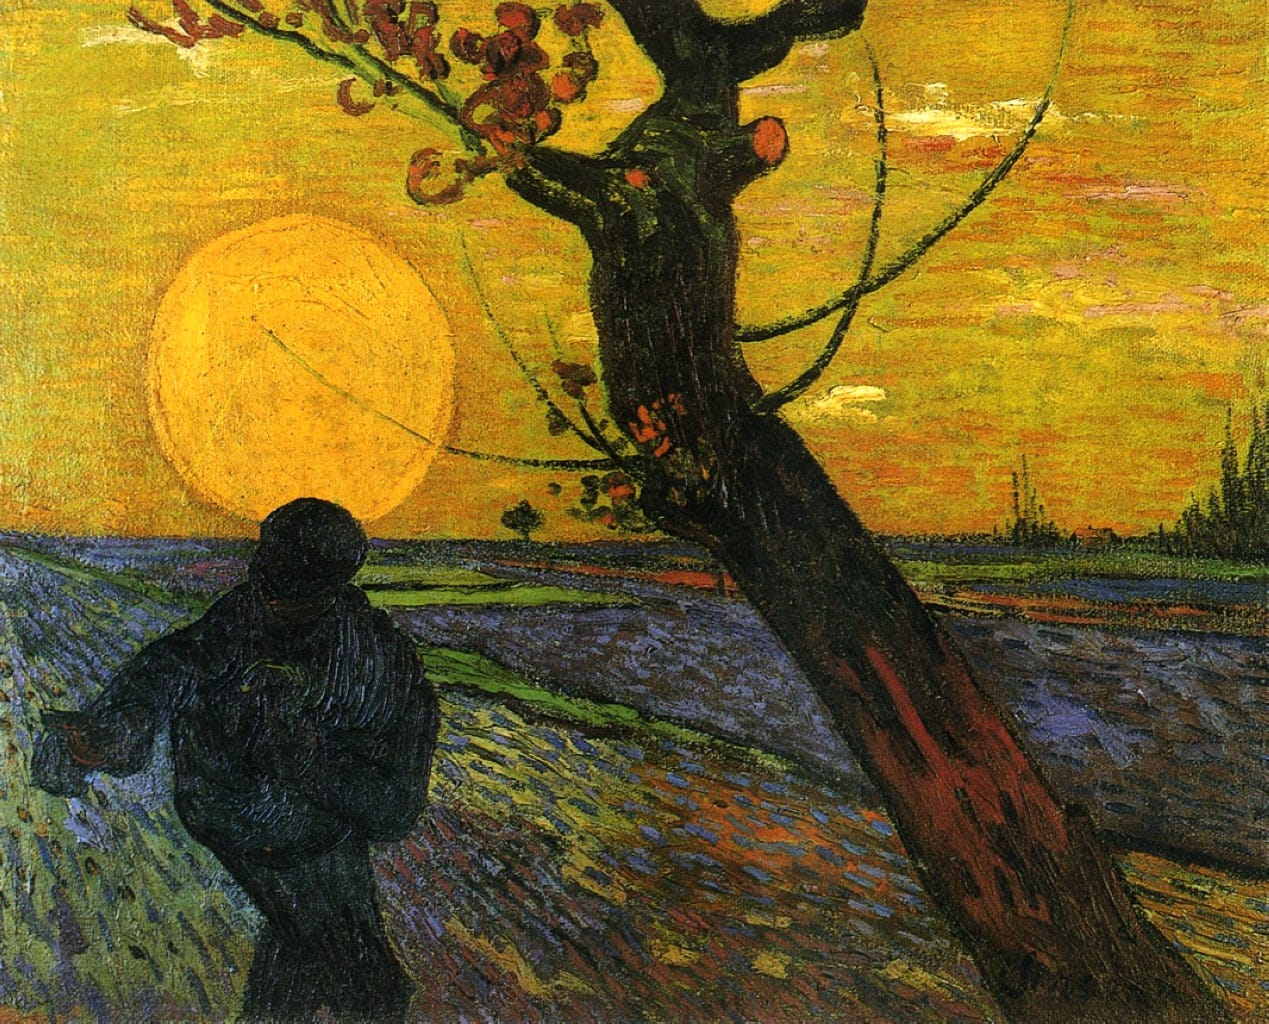 Sower with Setting Sun, 1888 - Vincent van Gogh - WikiArt.org